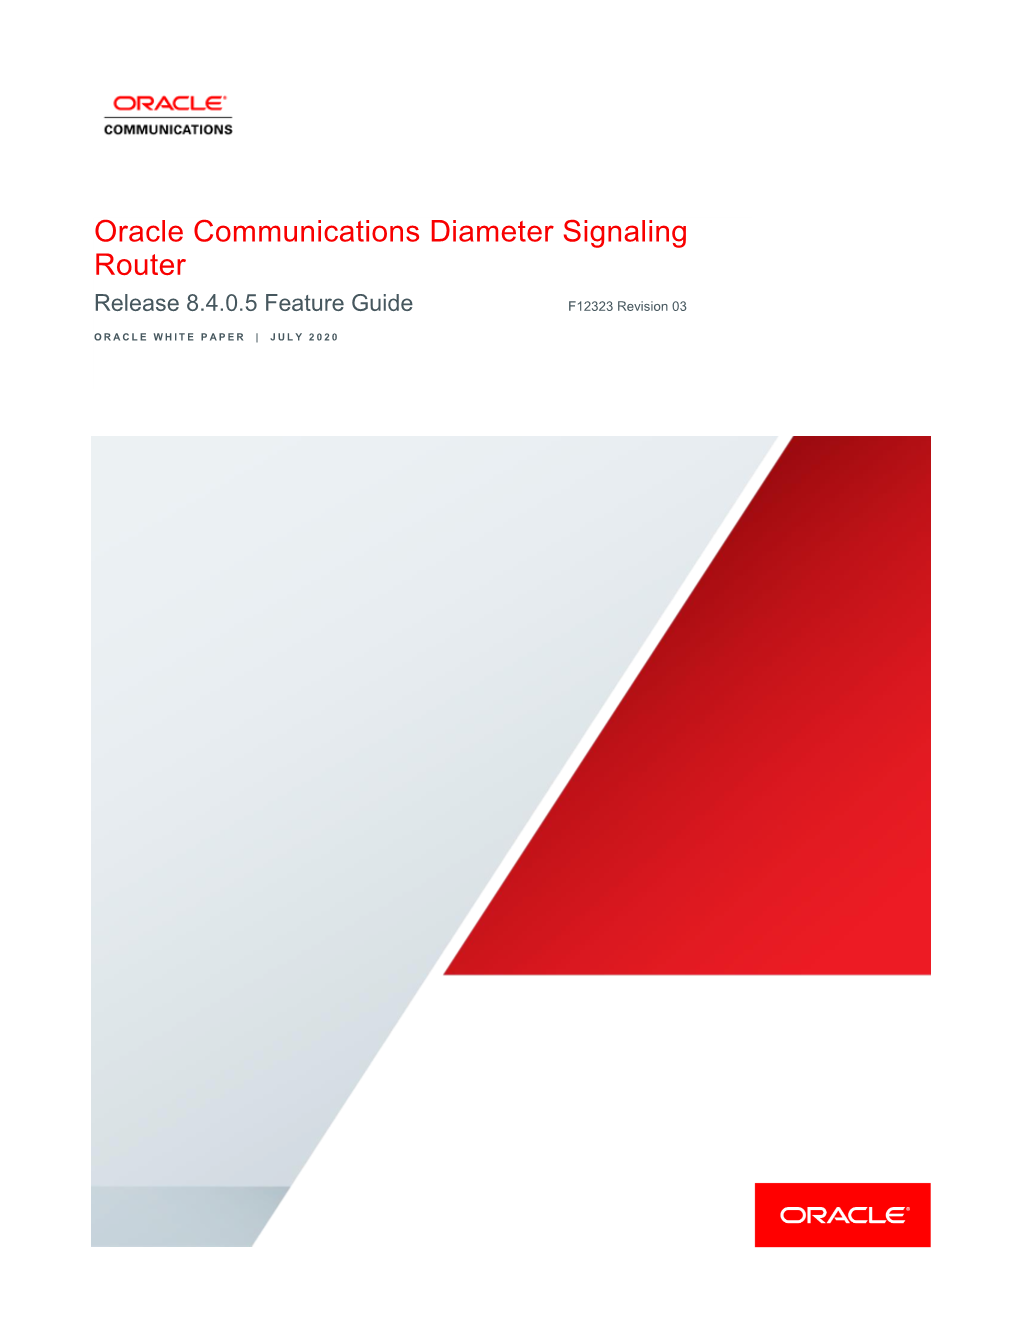 Oracle Communications Diameter Signaling Router Release 7.2